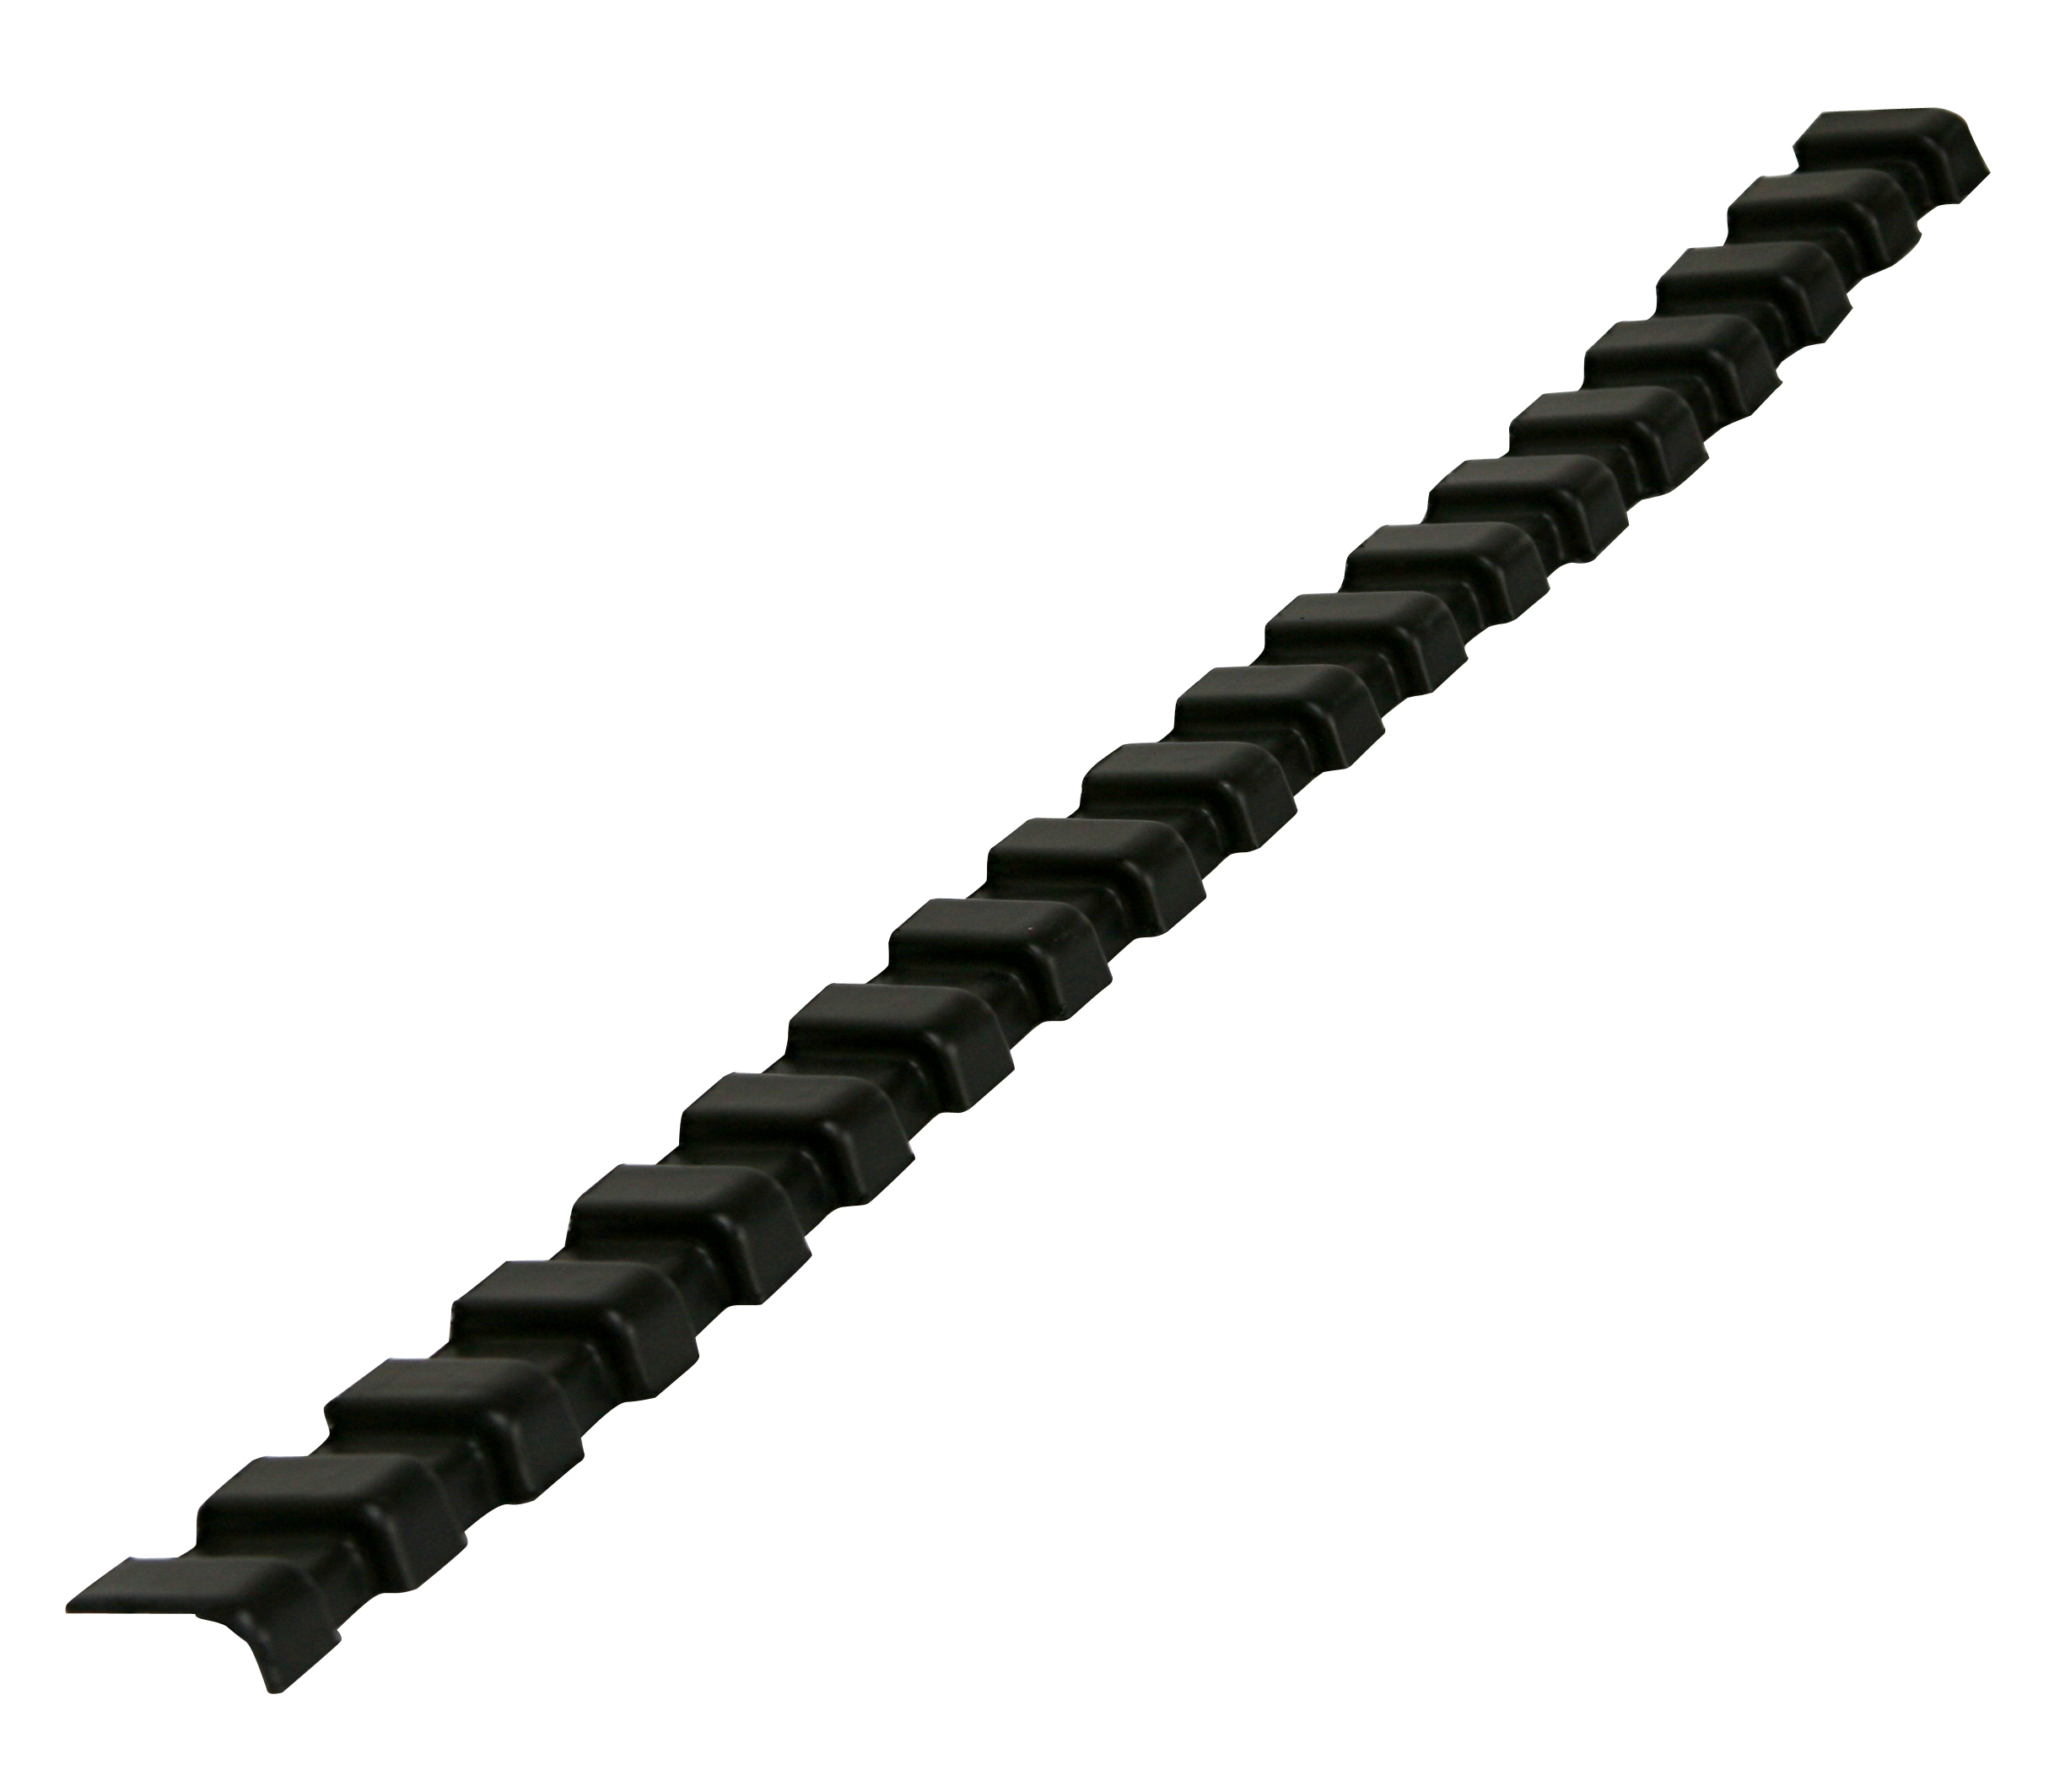 Metrotile Lightweight Roofing Accessories Hip Vent Strip